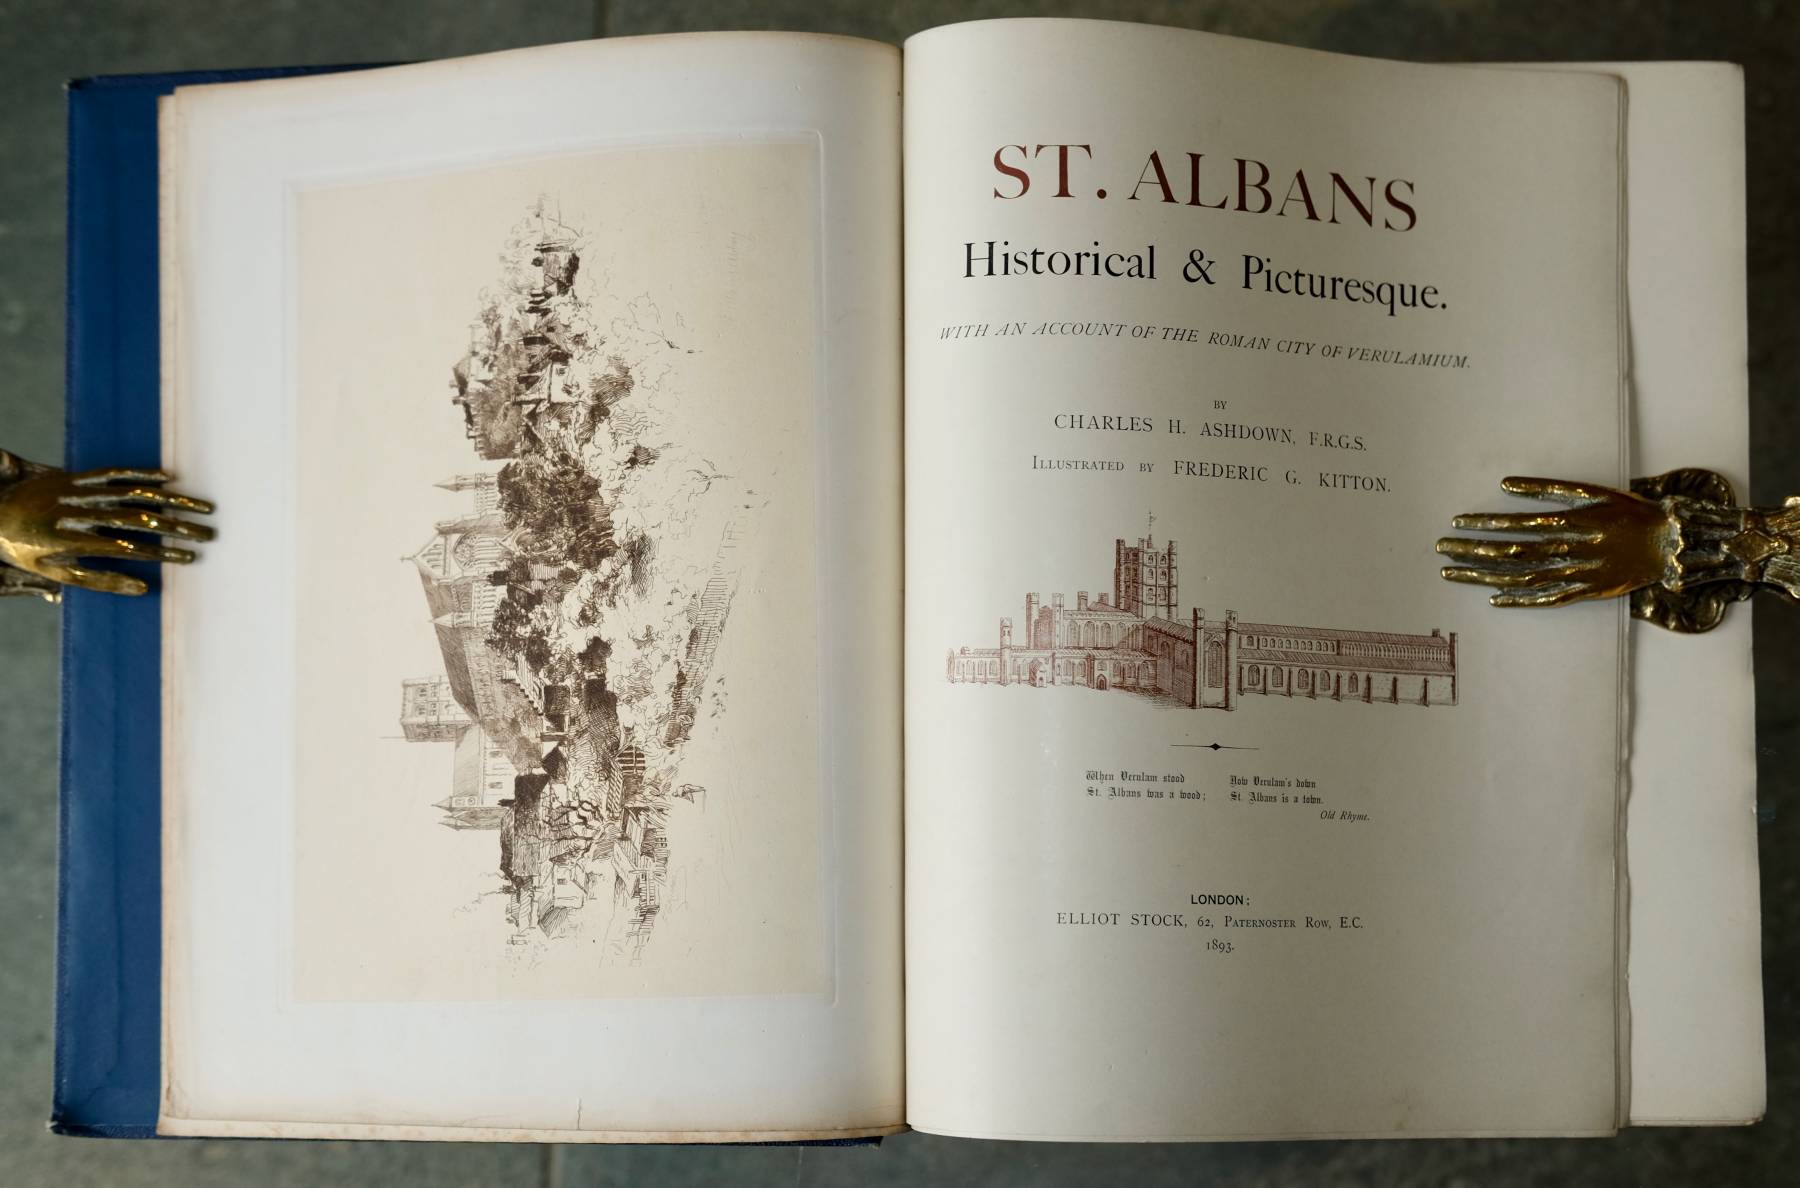 St Albans Historical & Picturesque by Charles Ashdown